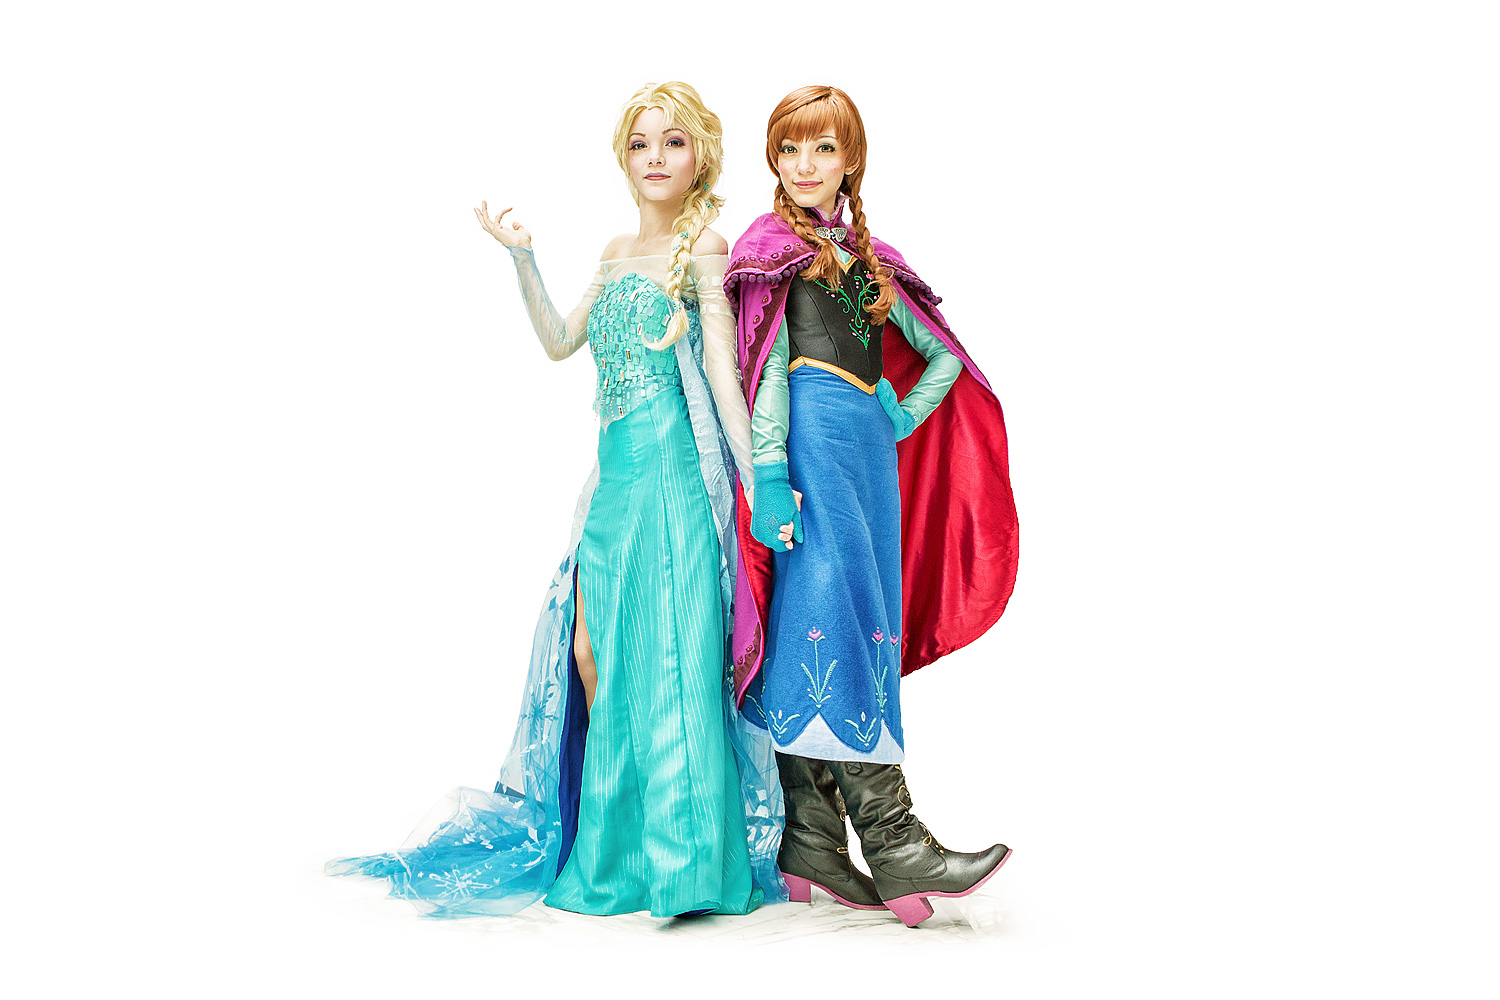 Yuurisans Cosplay as Elsa and Anna of Disney's Frozen